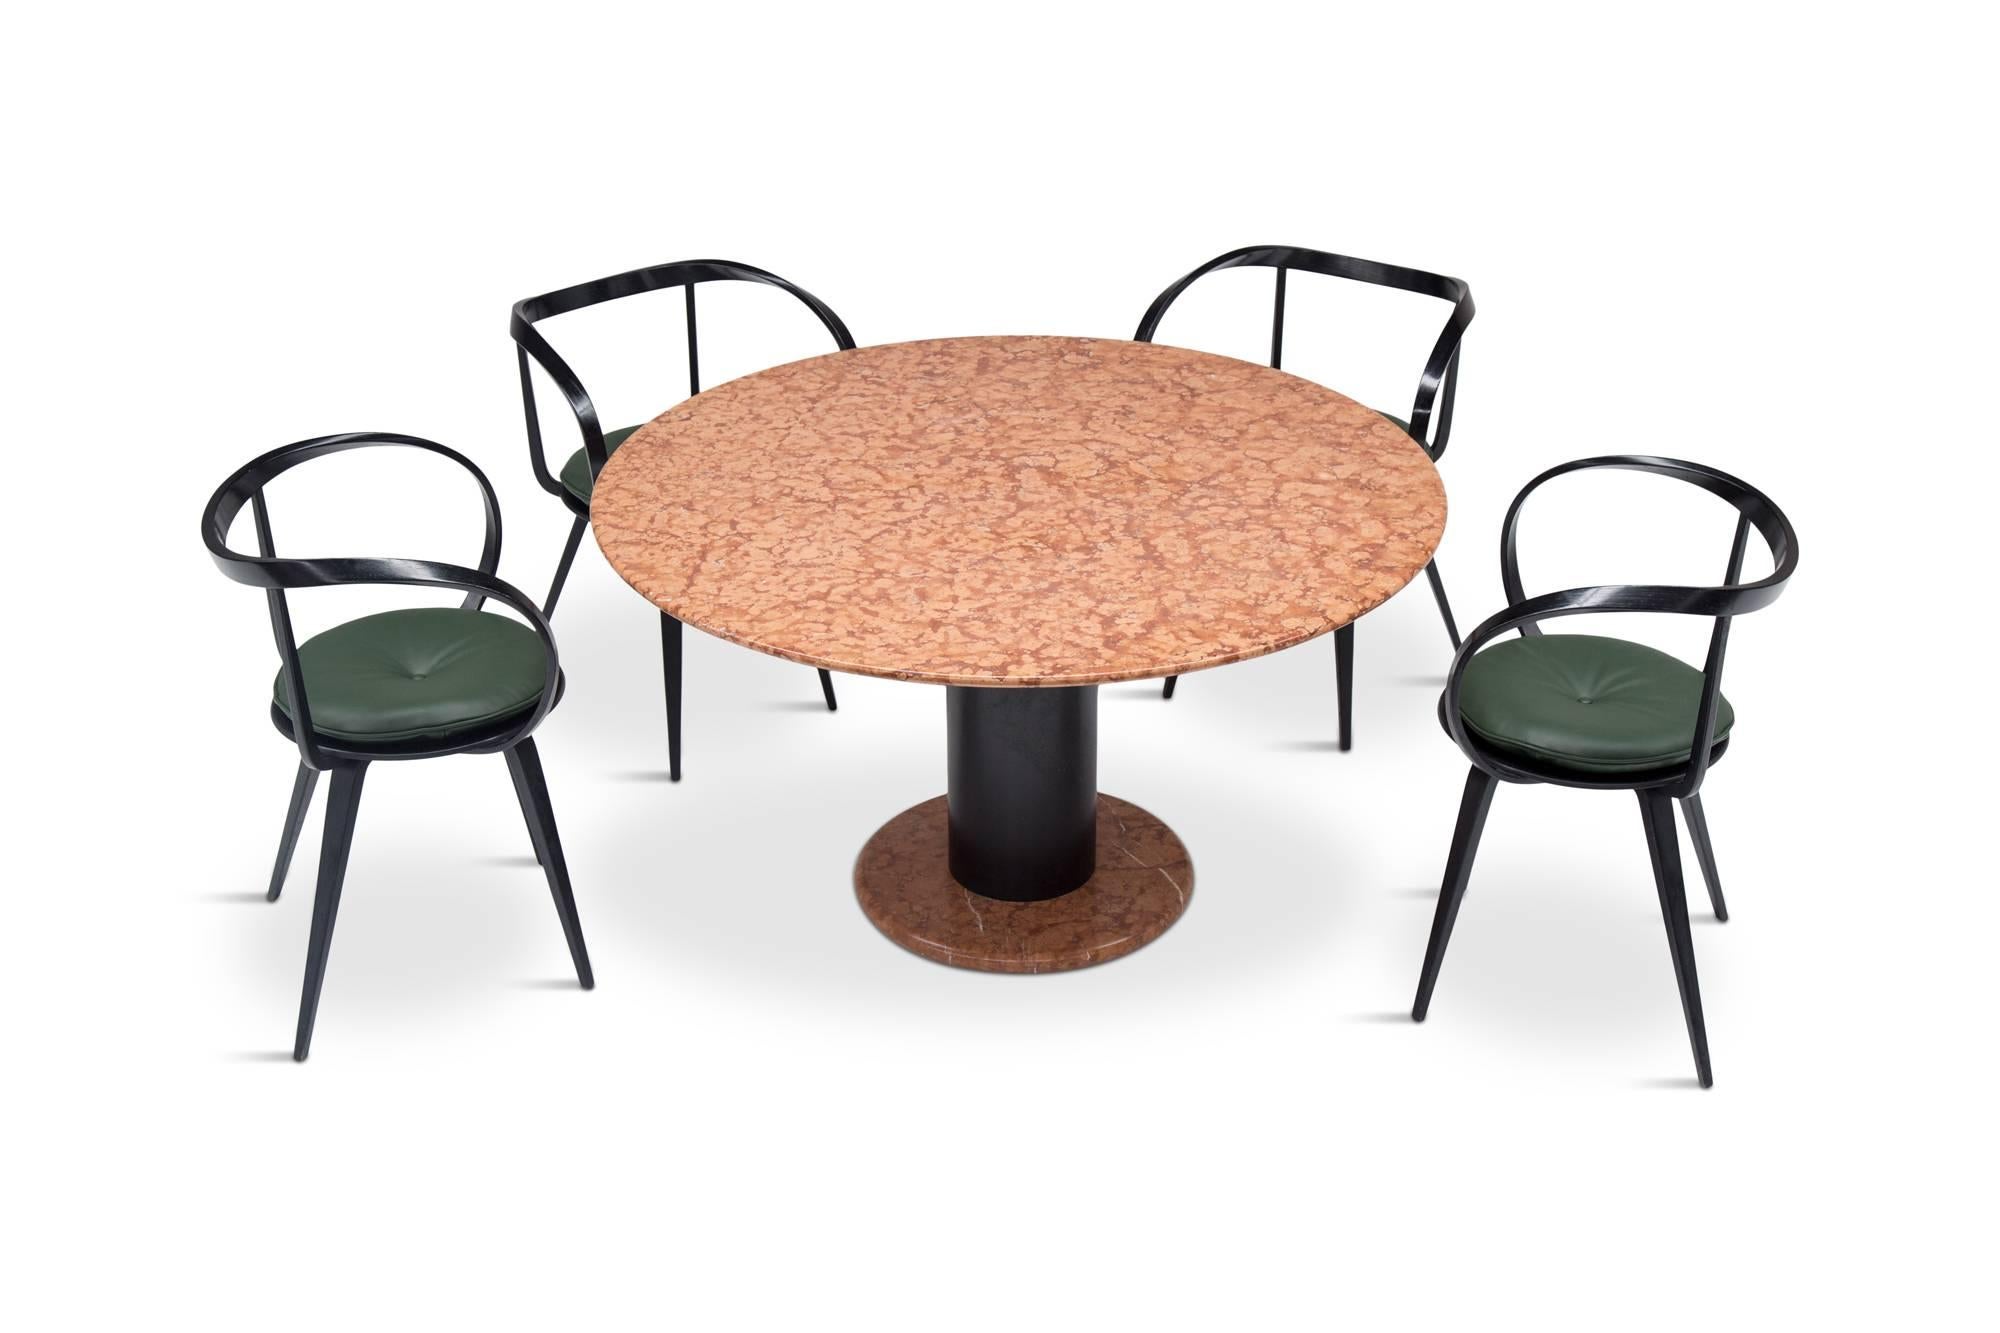 Postmodern memphis style table in marble by Ettore Sottsass for Poltronova, Italy, 1965. 

Round dining table by Italian master Ettore Sottsass. A black metal column with a round top, executed in beautiful rose marble.
 